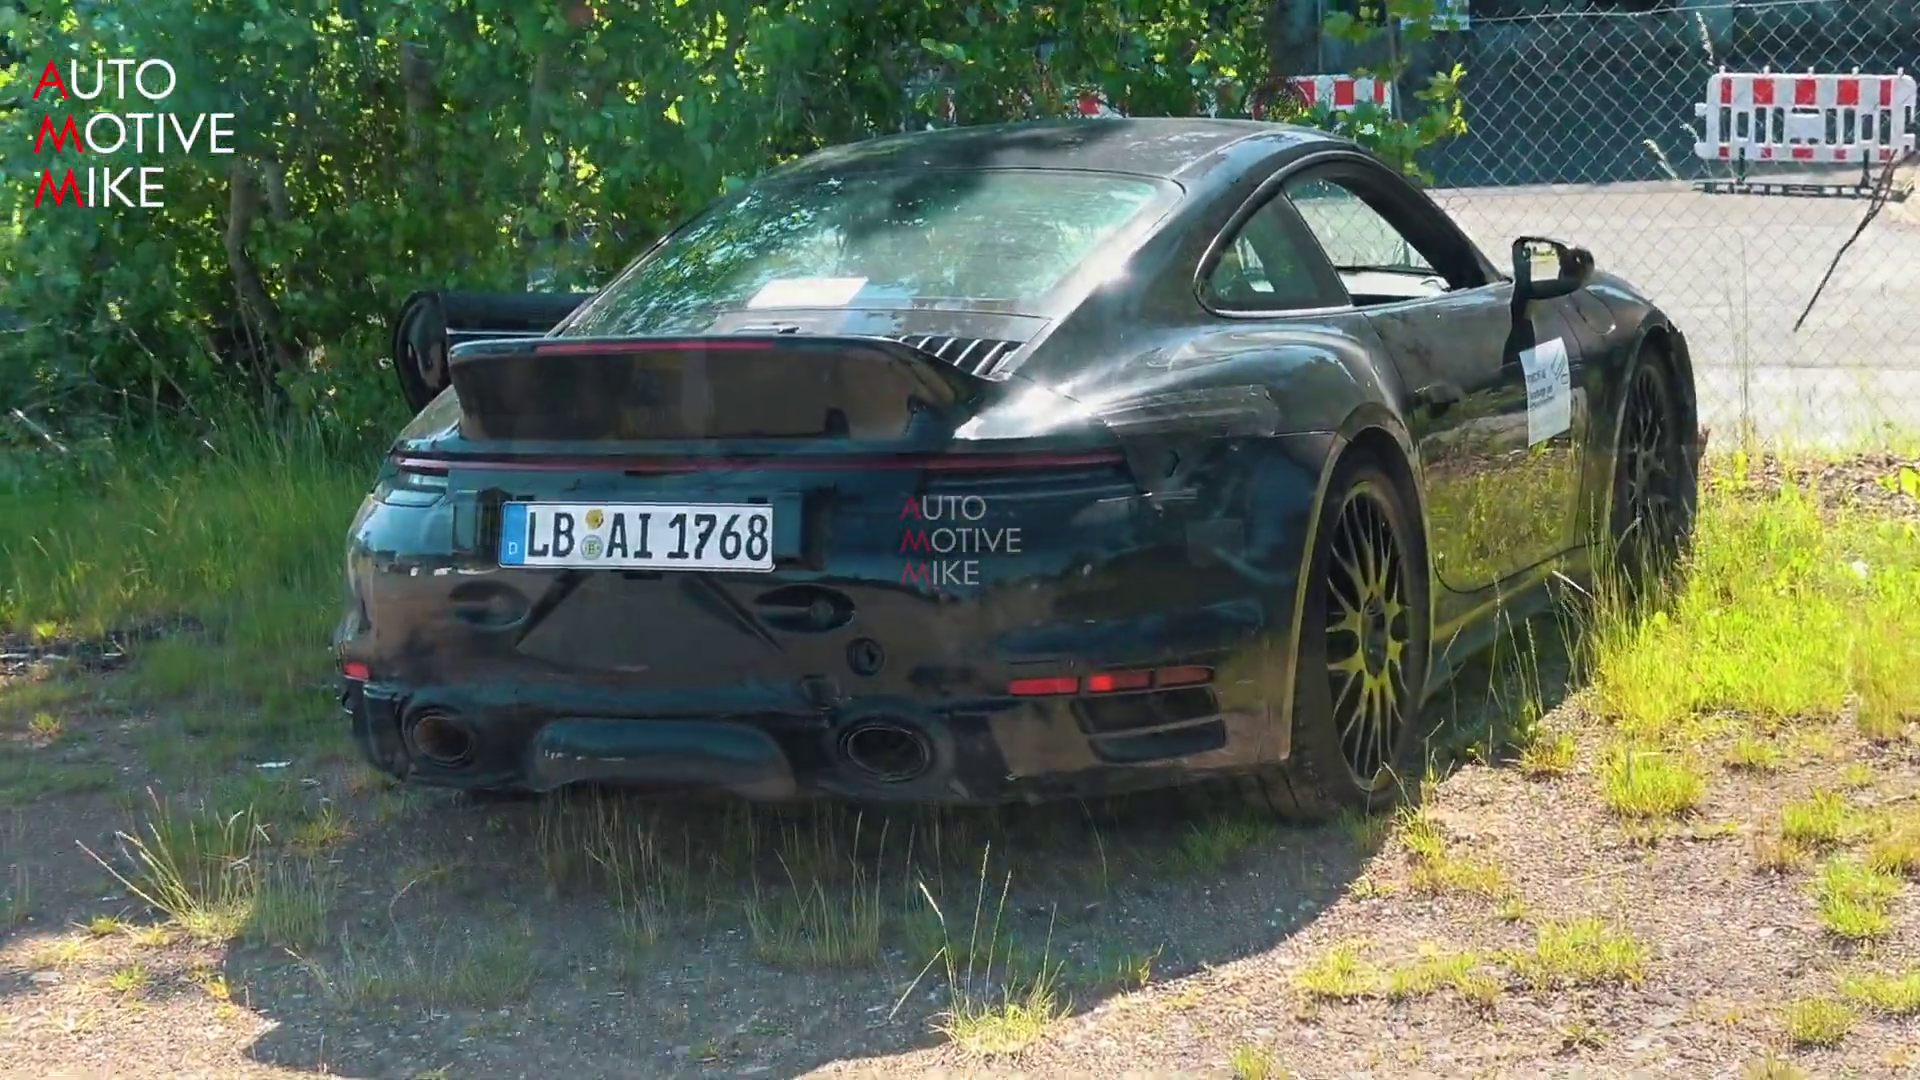 photo of Potential 911 Sport Classic Prototype Spotted image